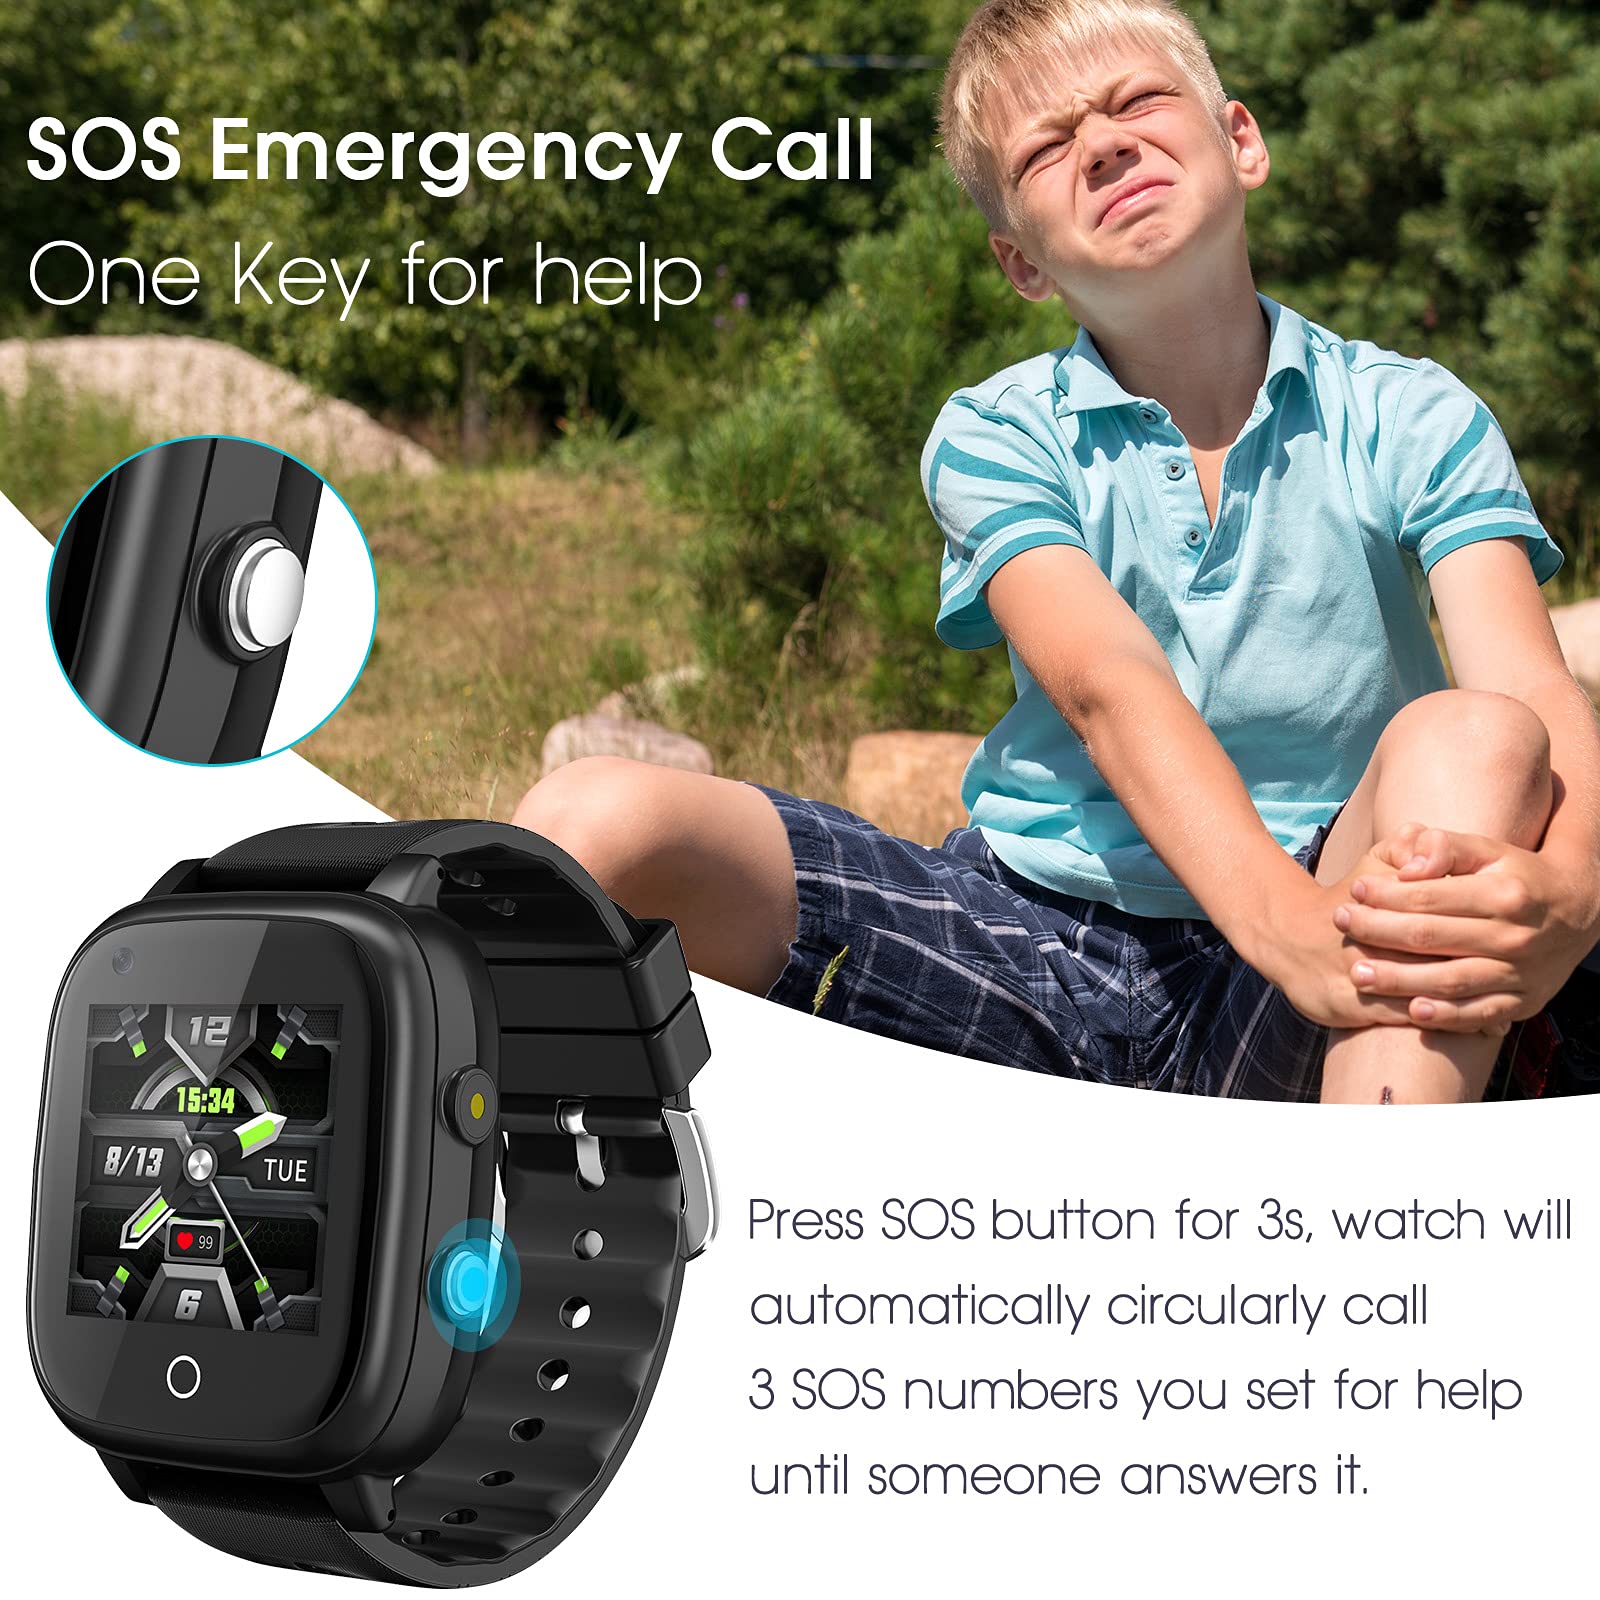 cjc 4G Kids Smartwatch, Smart Watch for Kids, IP67 Waterproof Watches with GPS Tracker, 2 Way Call Camera Voice & Video Call SOS Alerts Pedometer WiFi Wrist Watch, 3-12 Years Boys Girls Gifts